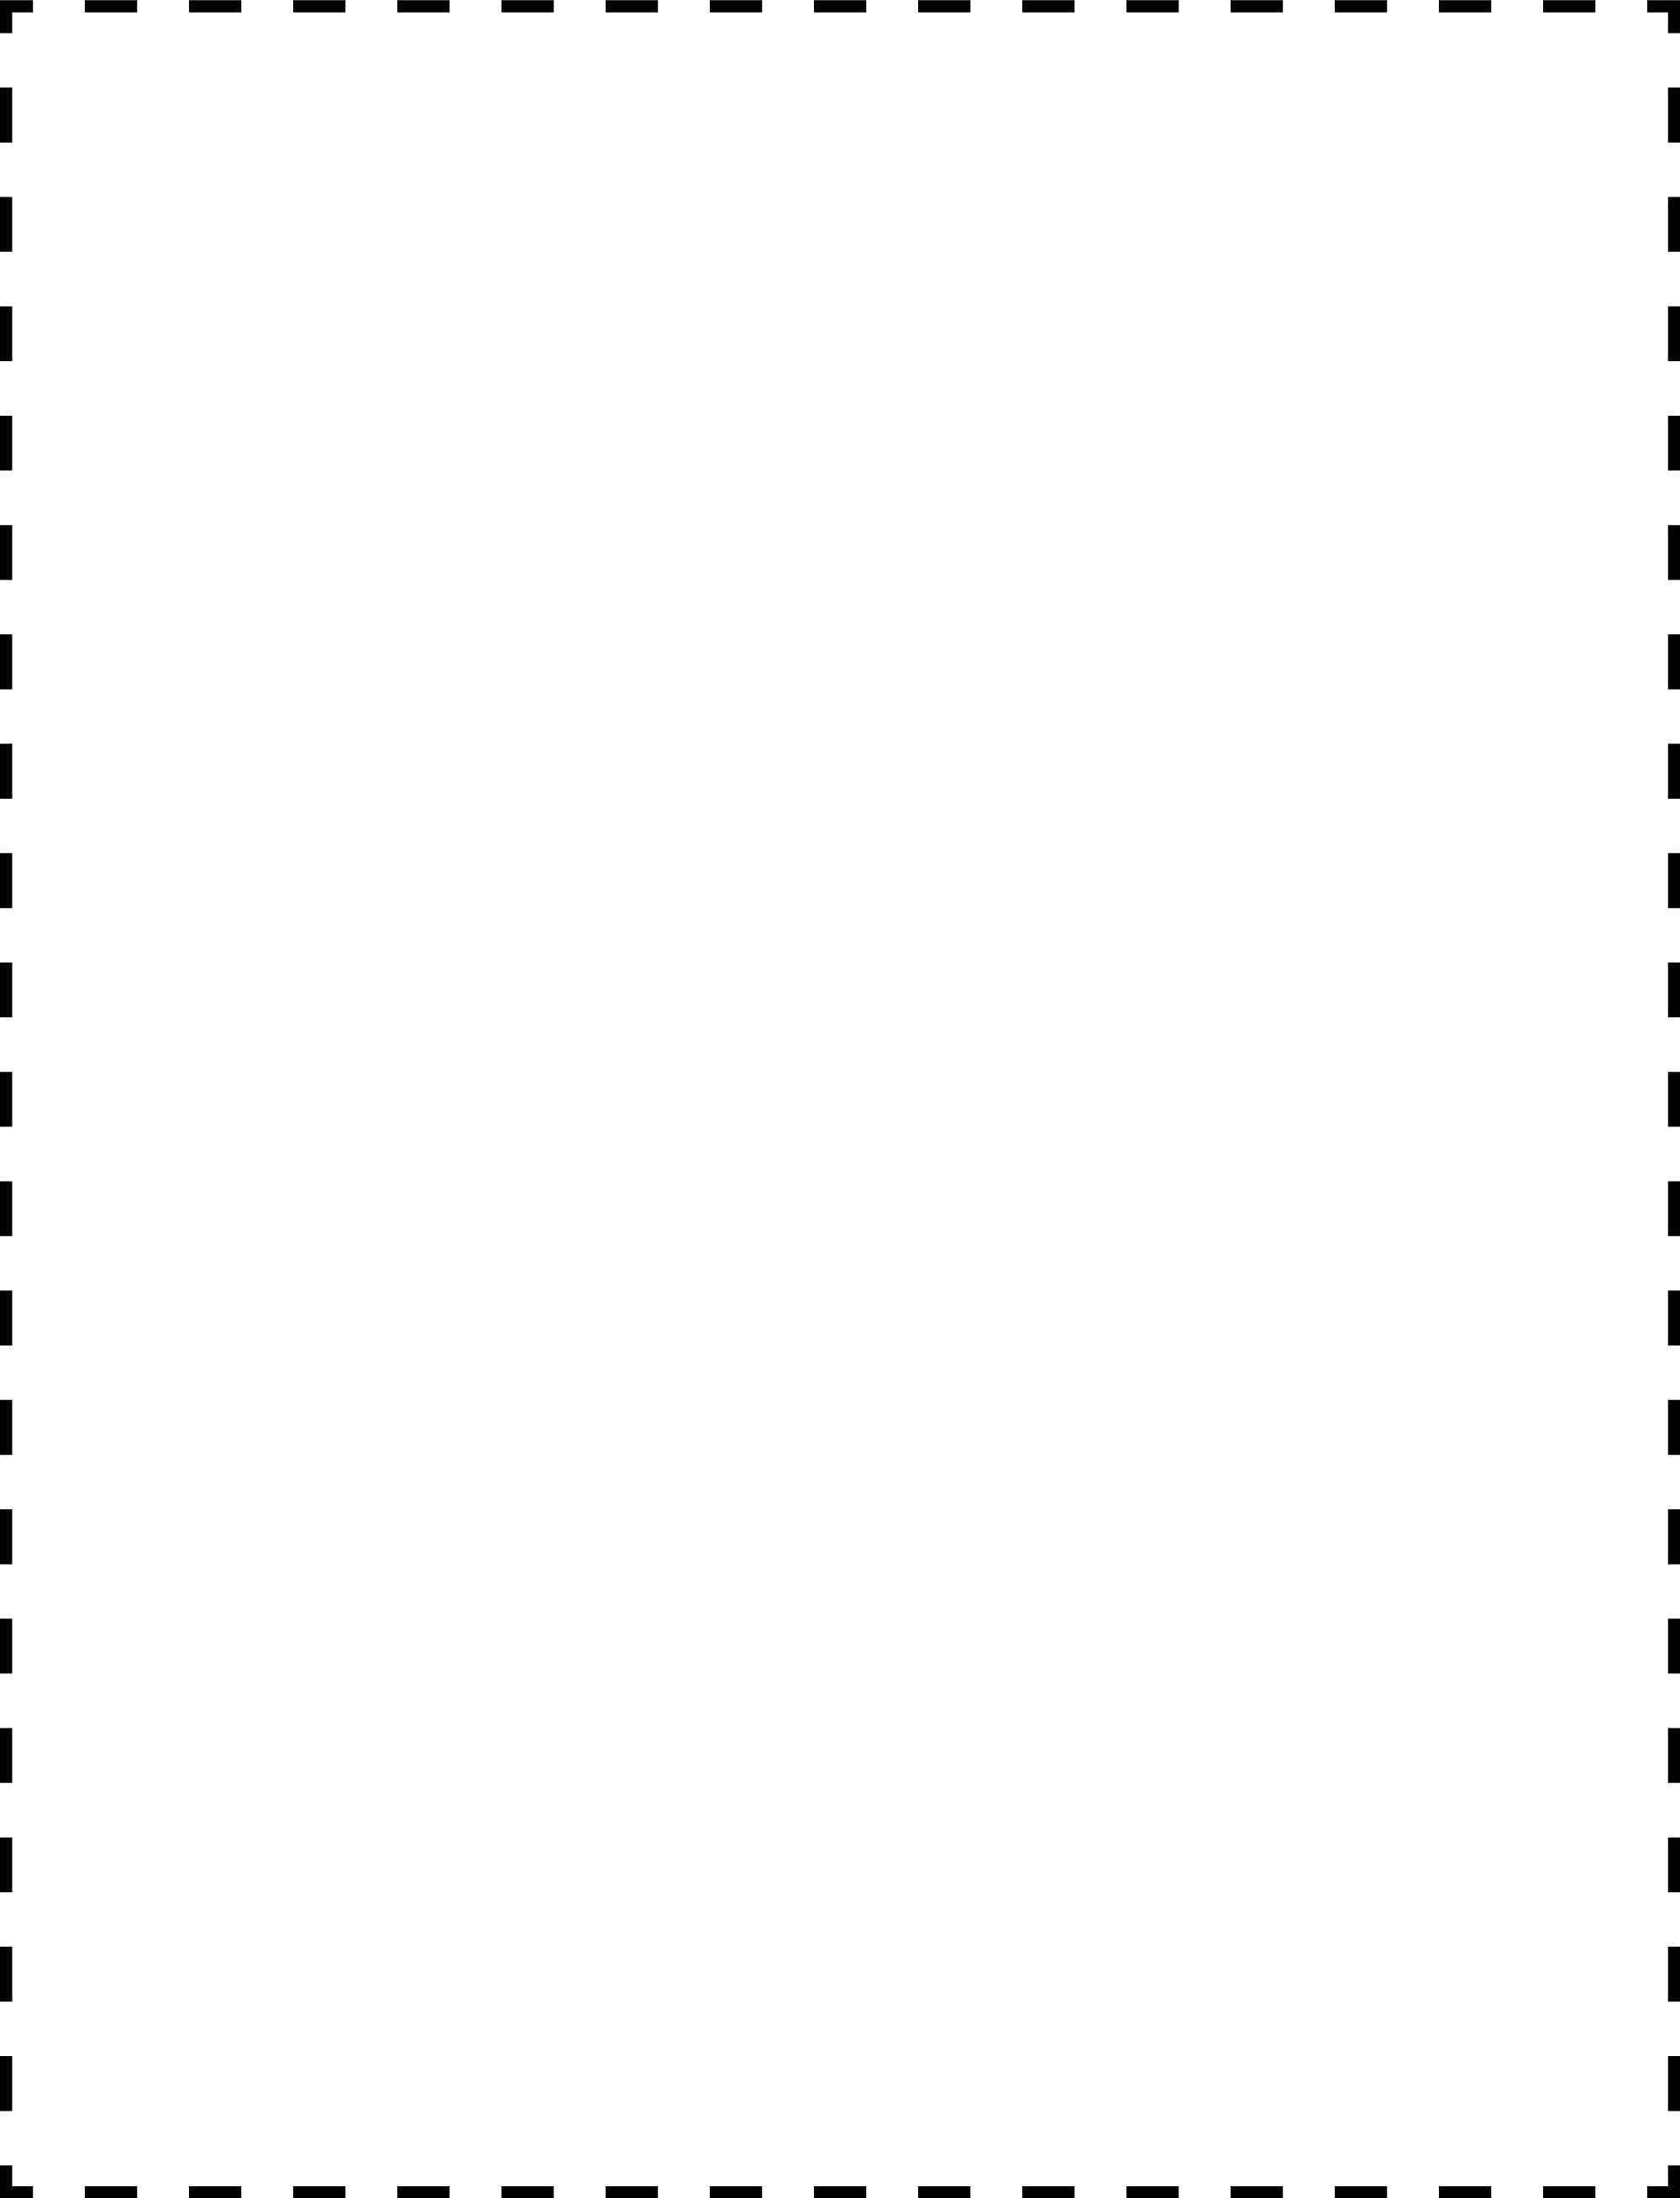 2061-coupon-outline-4x5-k.png